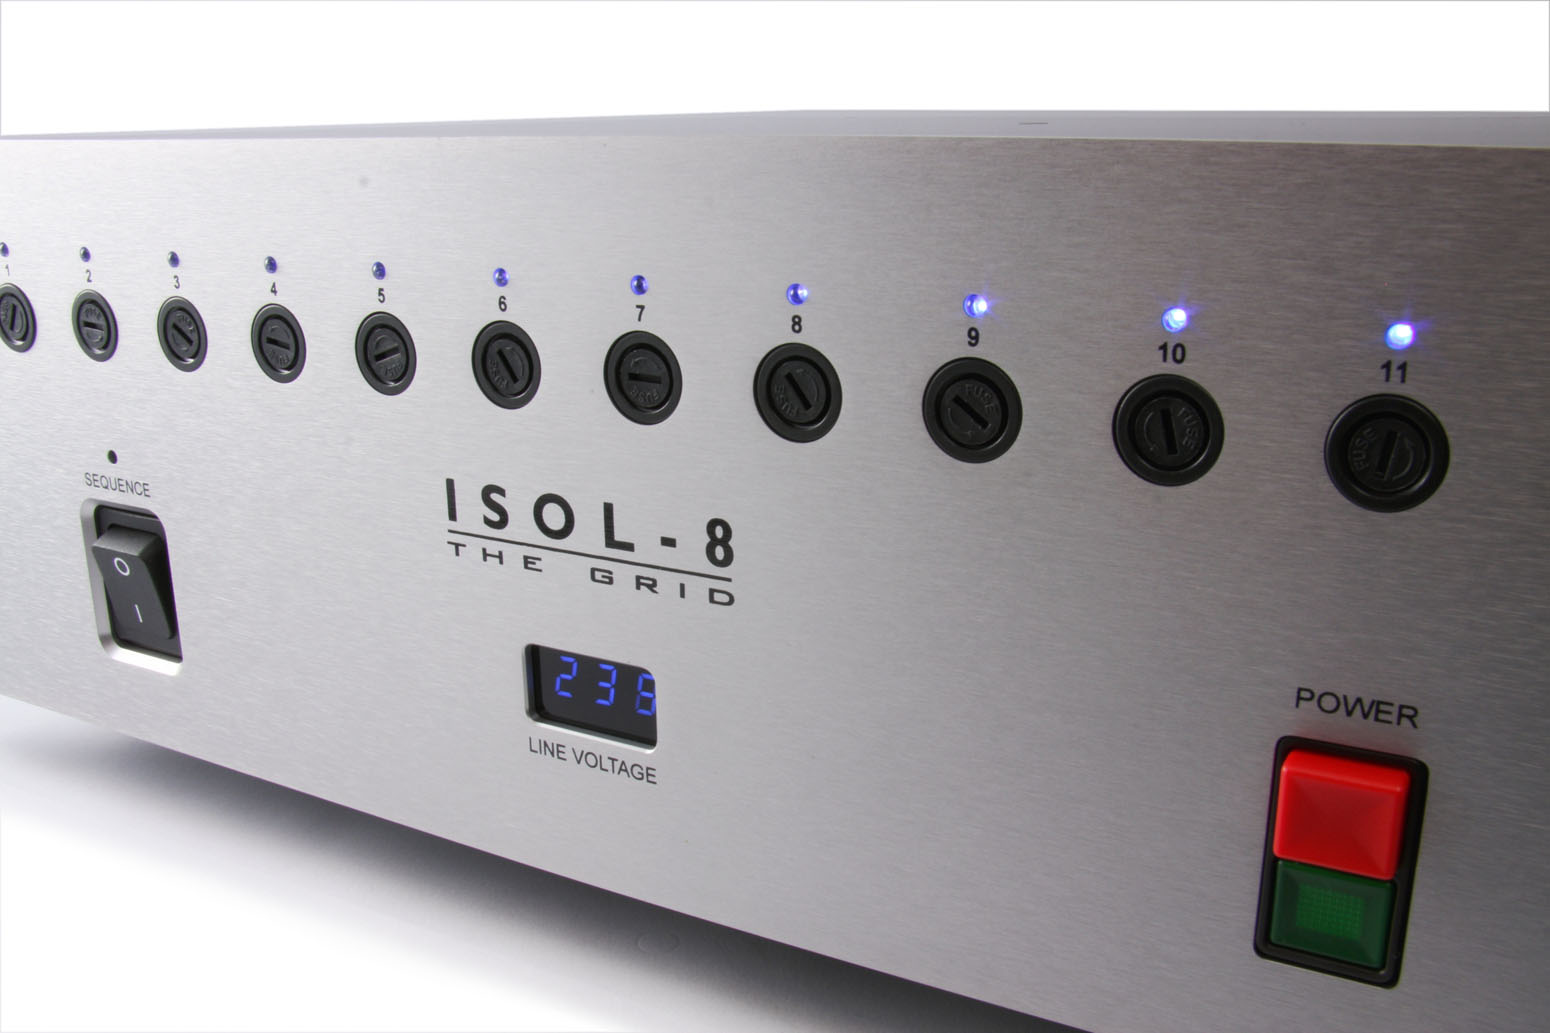 ISOL-8 The Grid